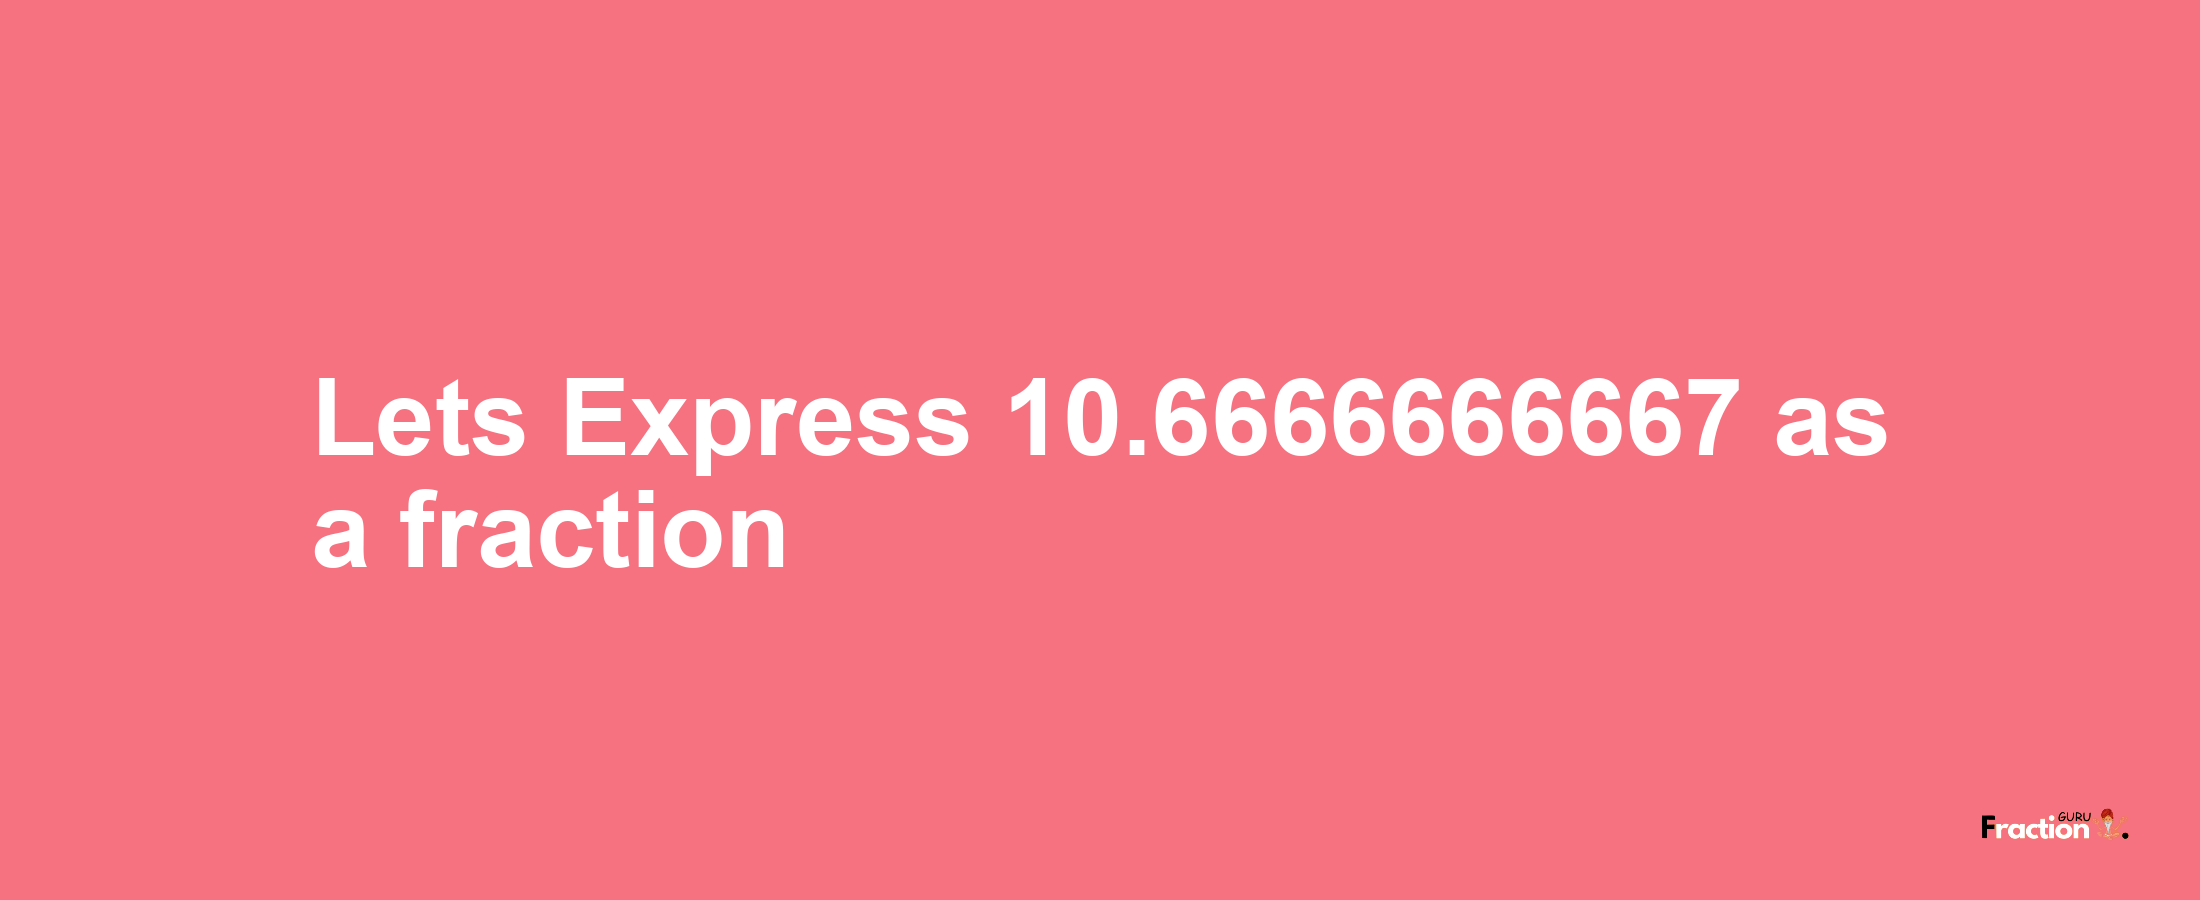 Lets Express 10.6666666667 as afraction